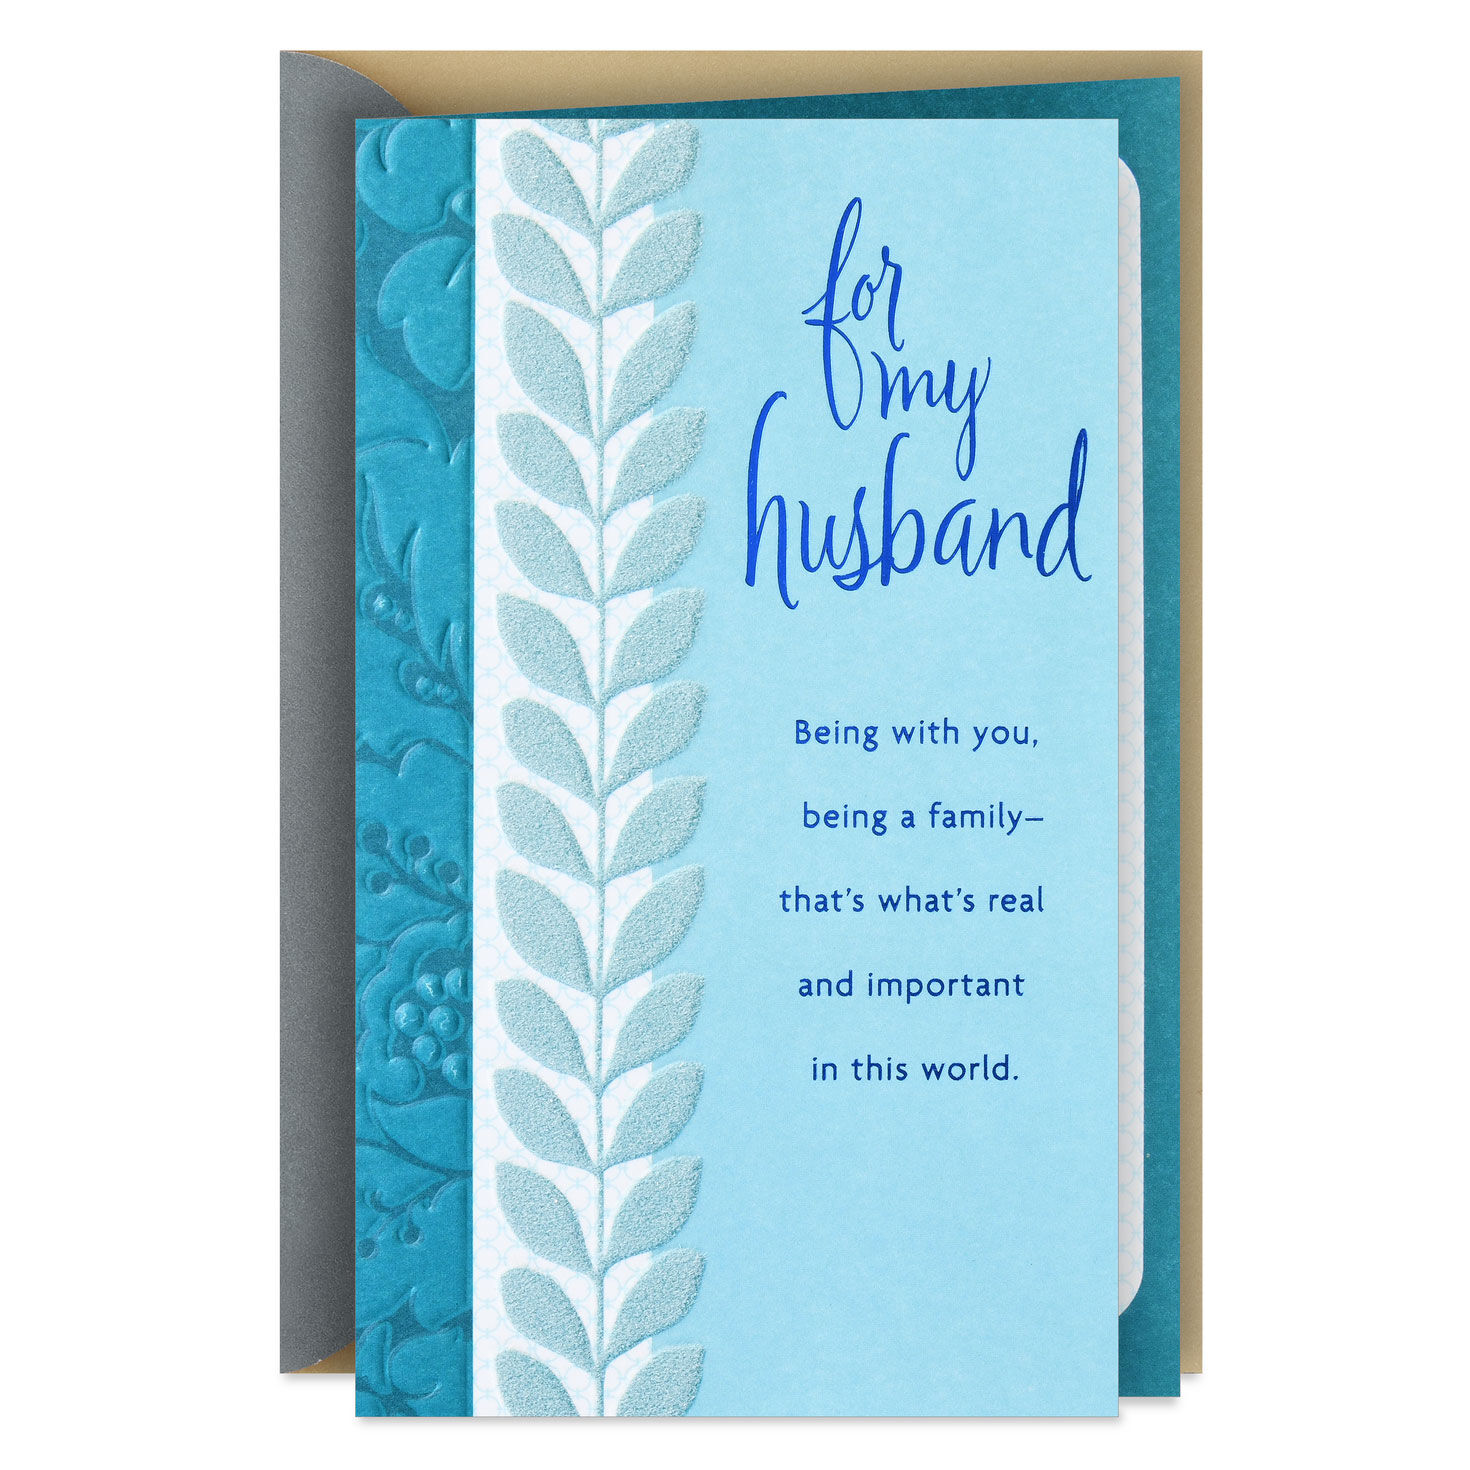 You're a True Partner Father's Day Card for Husband for only USD 5.59 | Hallmark